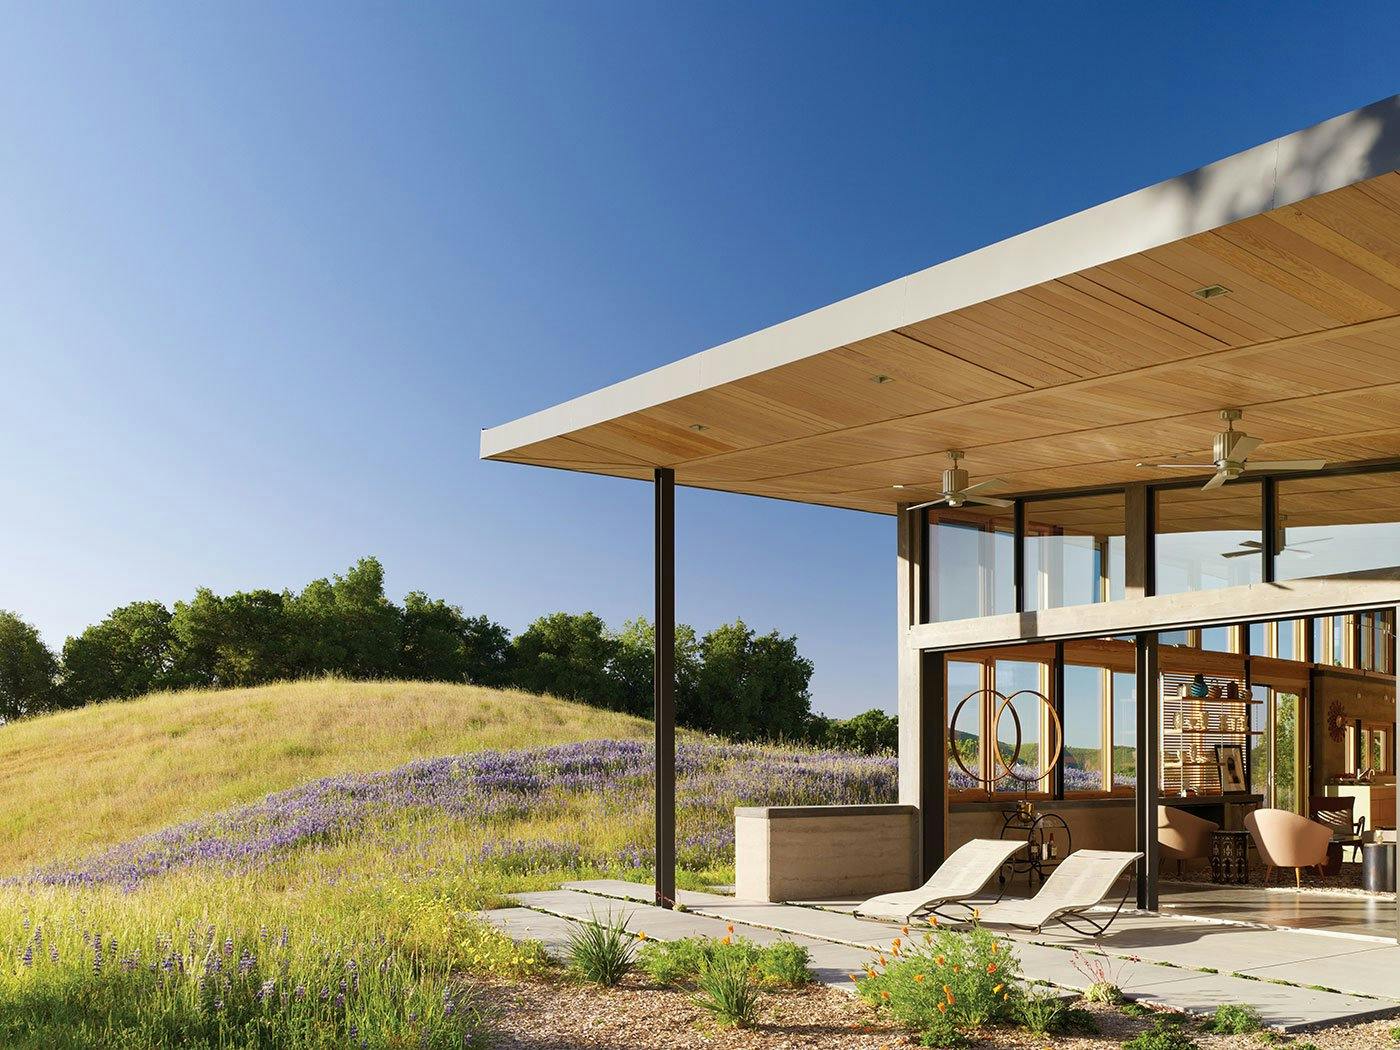 A hilltop ranch home with a large overhang covering a patio that’s connected to the home through large Liftslide Doors.